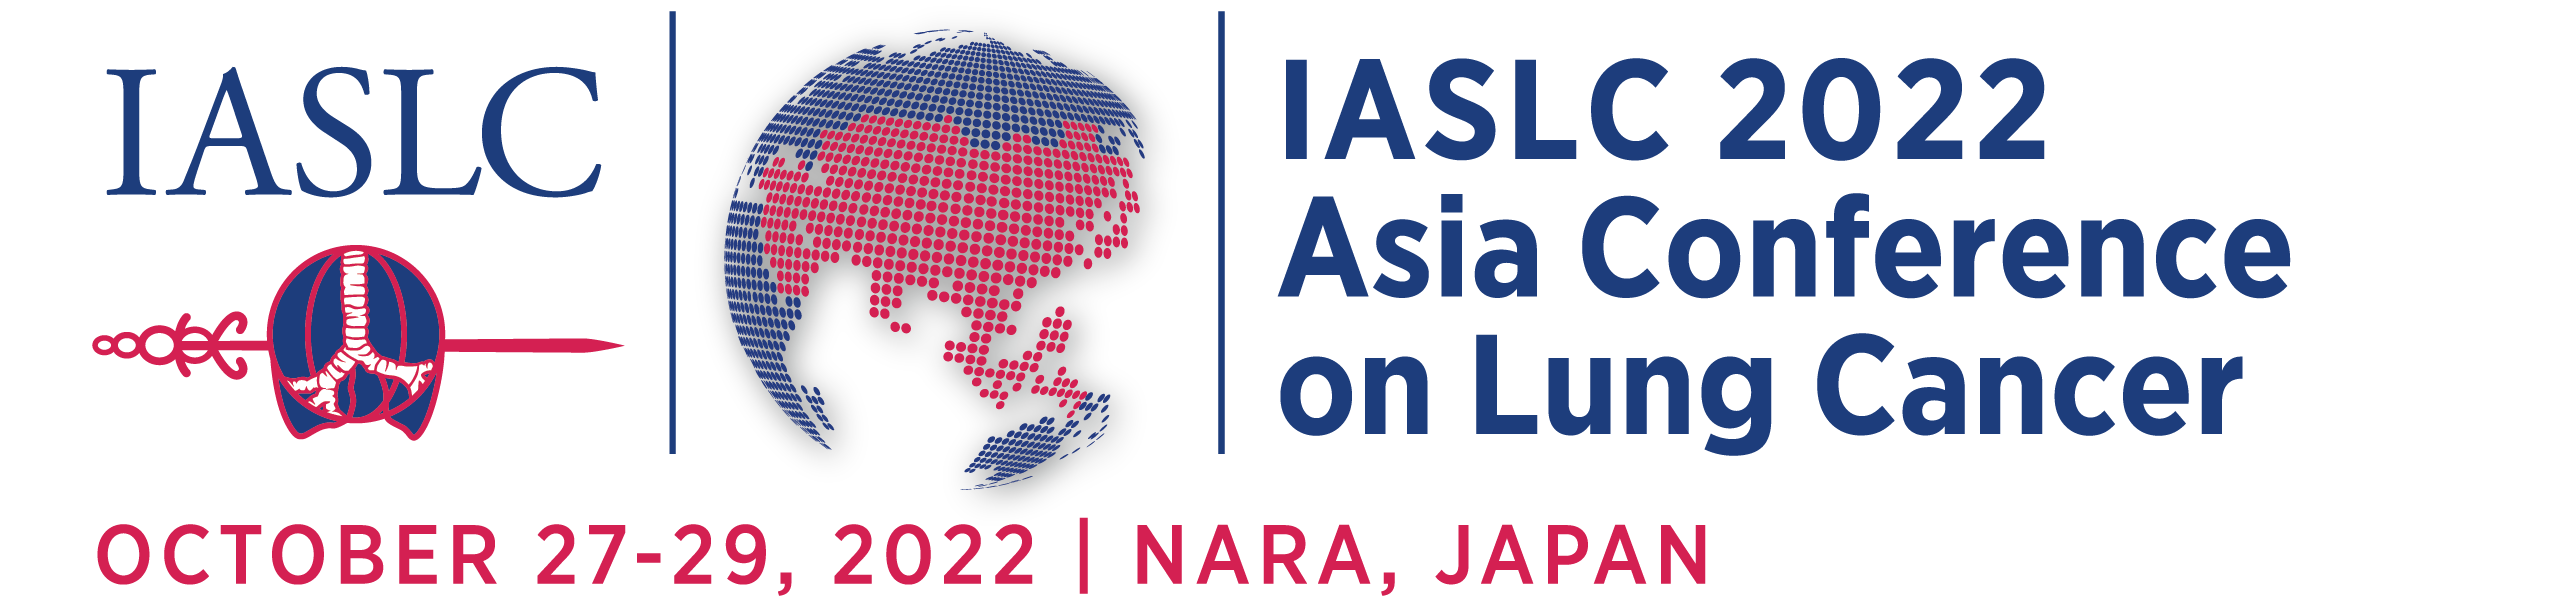 Industry Supported Symposia IASLC 2022 Asia Conference on Lung Cancer